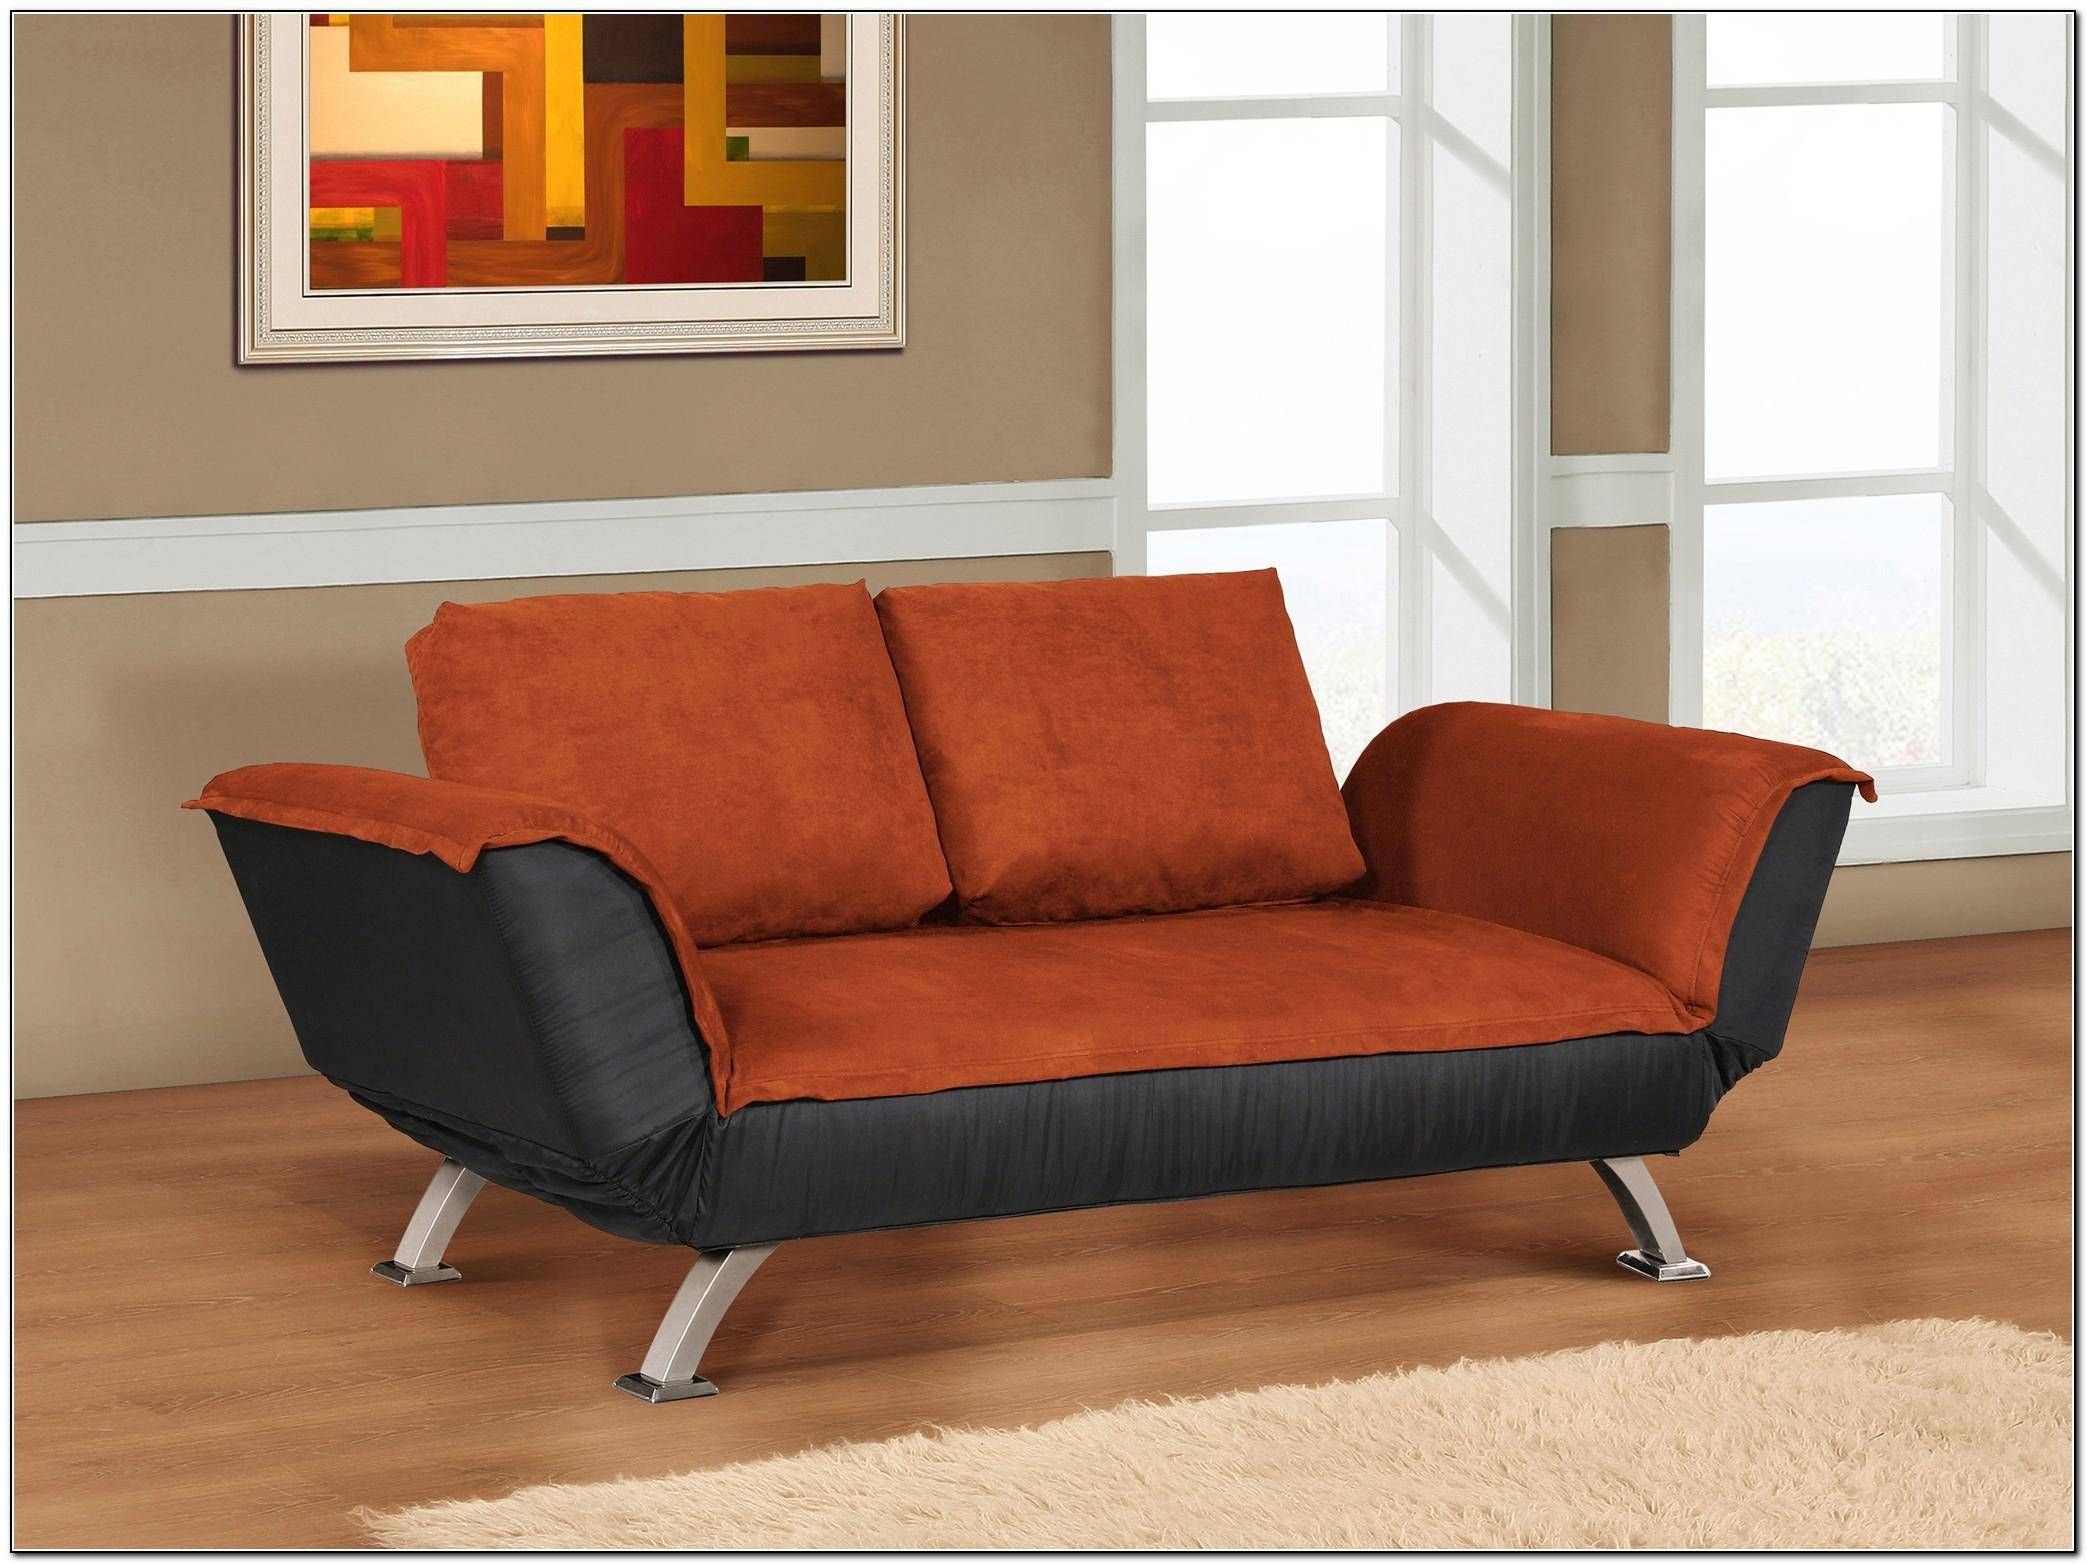 Awesome Castro Convertible Sofa Bed 79 For Your Contemporary Sofa Intended For Castro Convertible Sofa Beds (View 15 of 15)